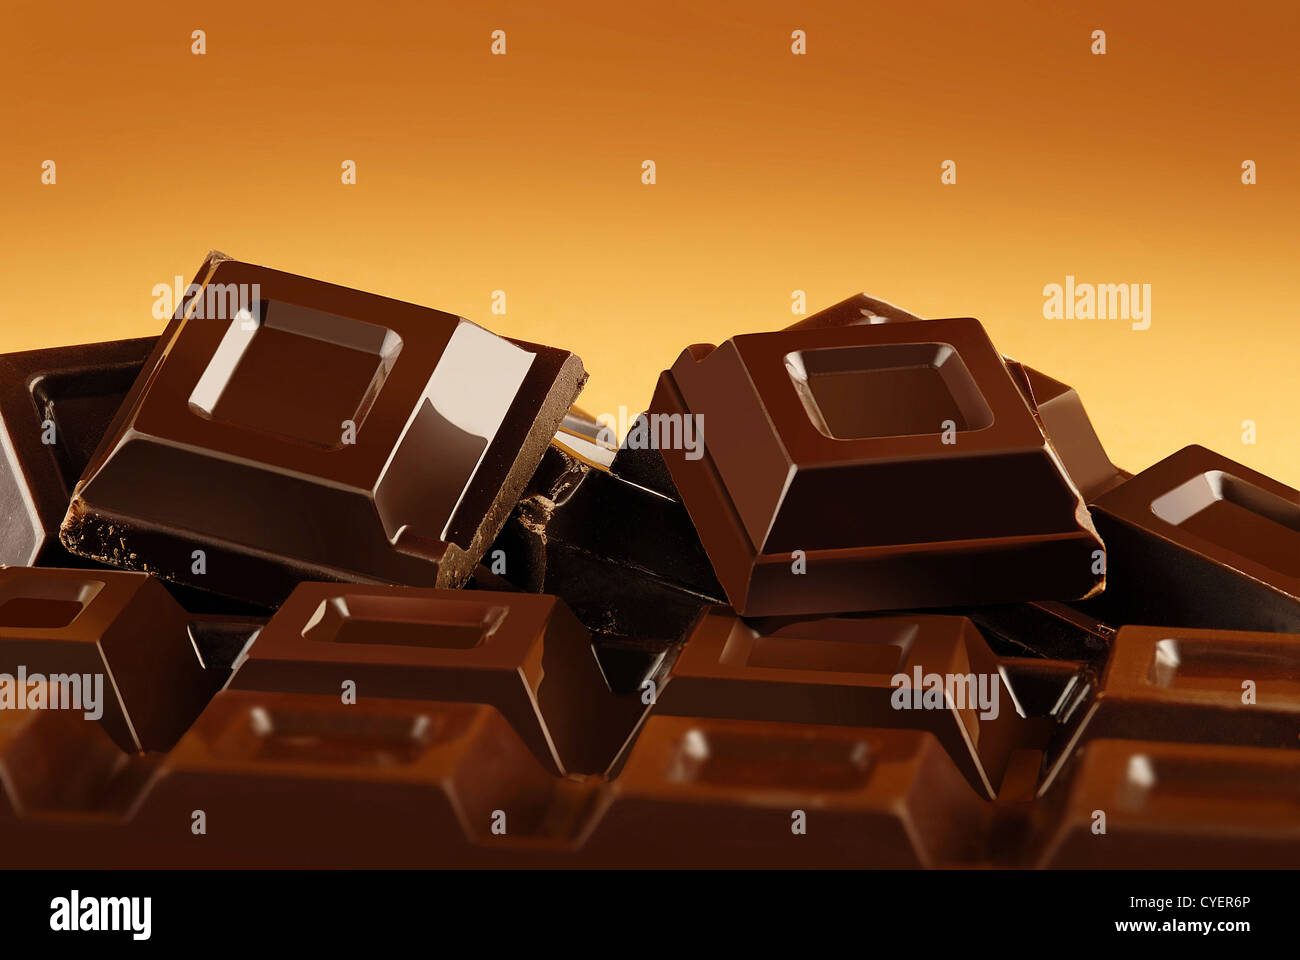 Broken chocolate bar on a brown background Stock Photo